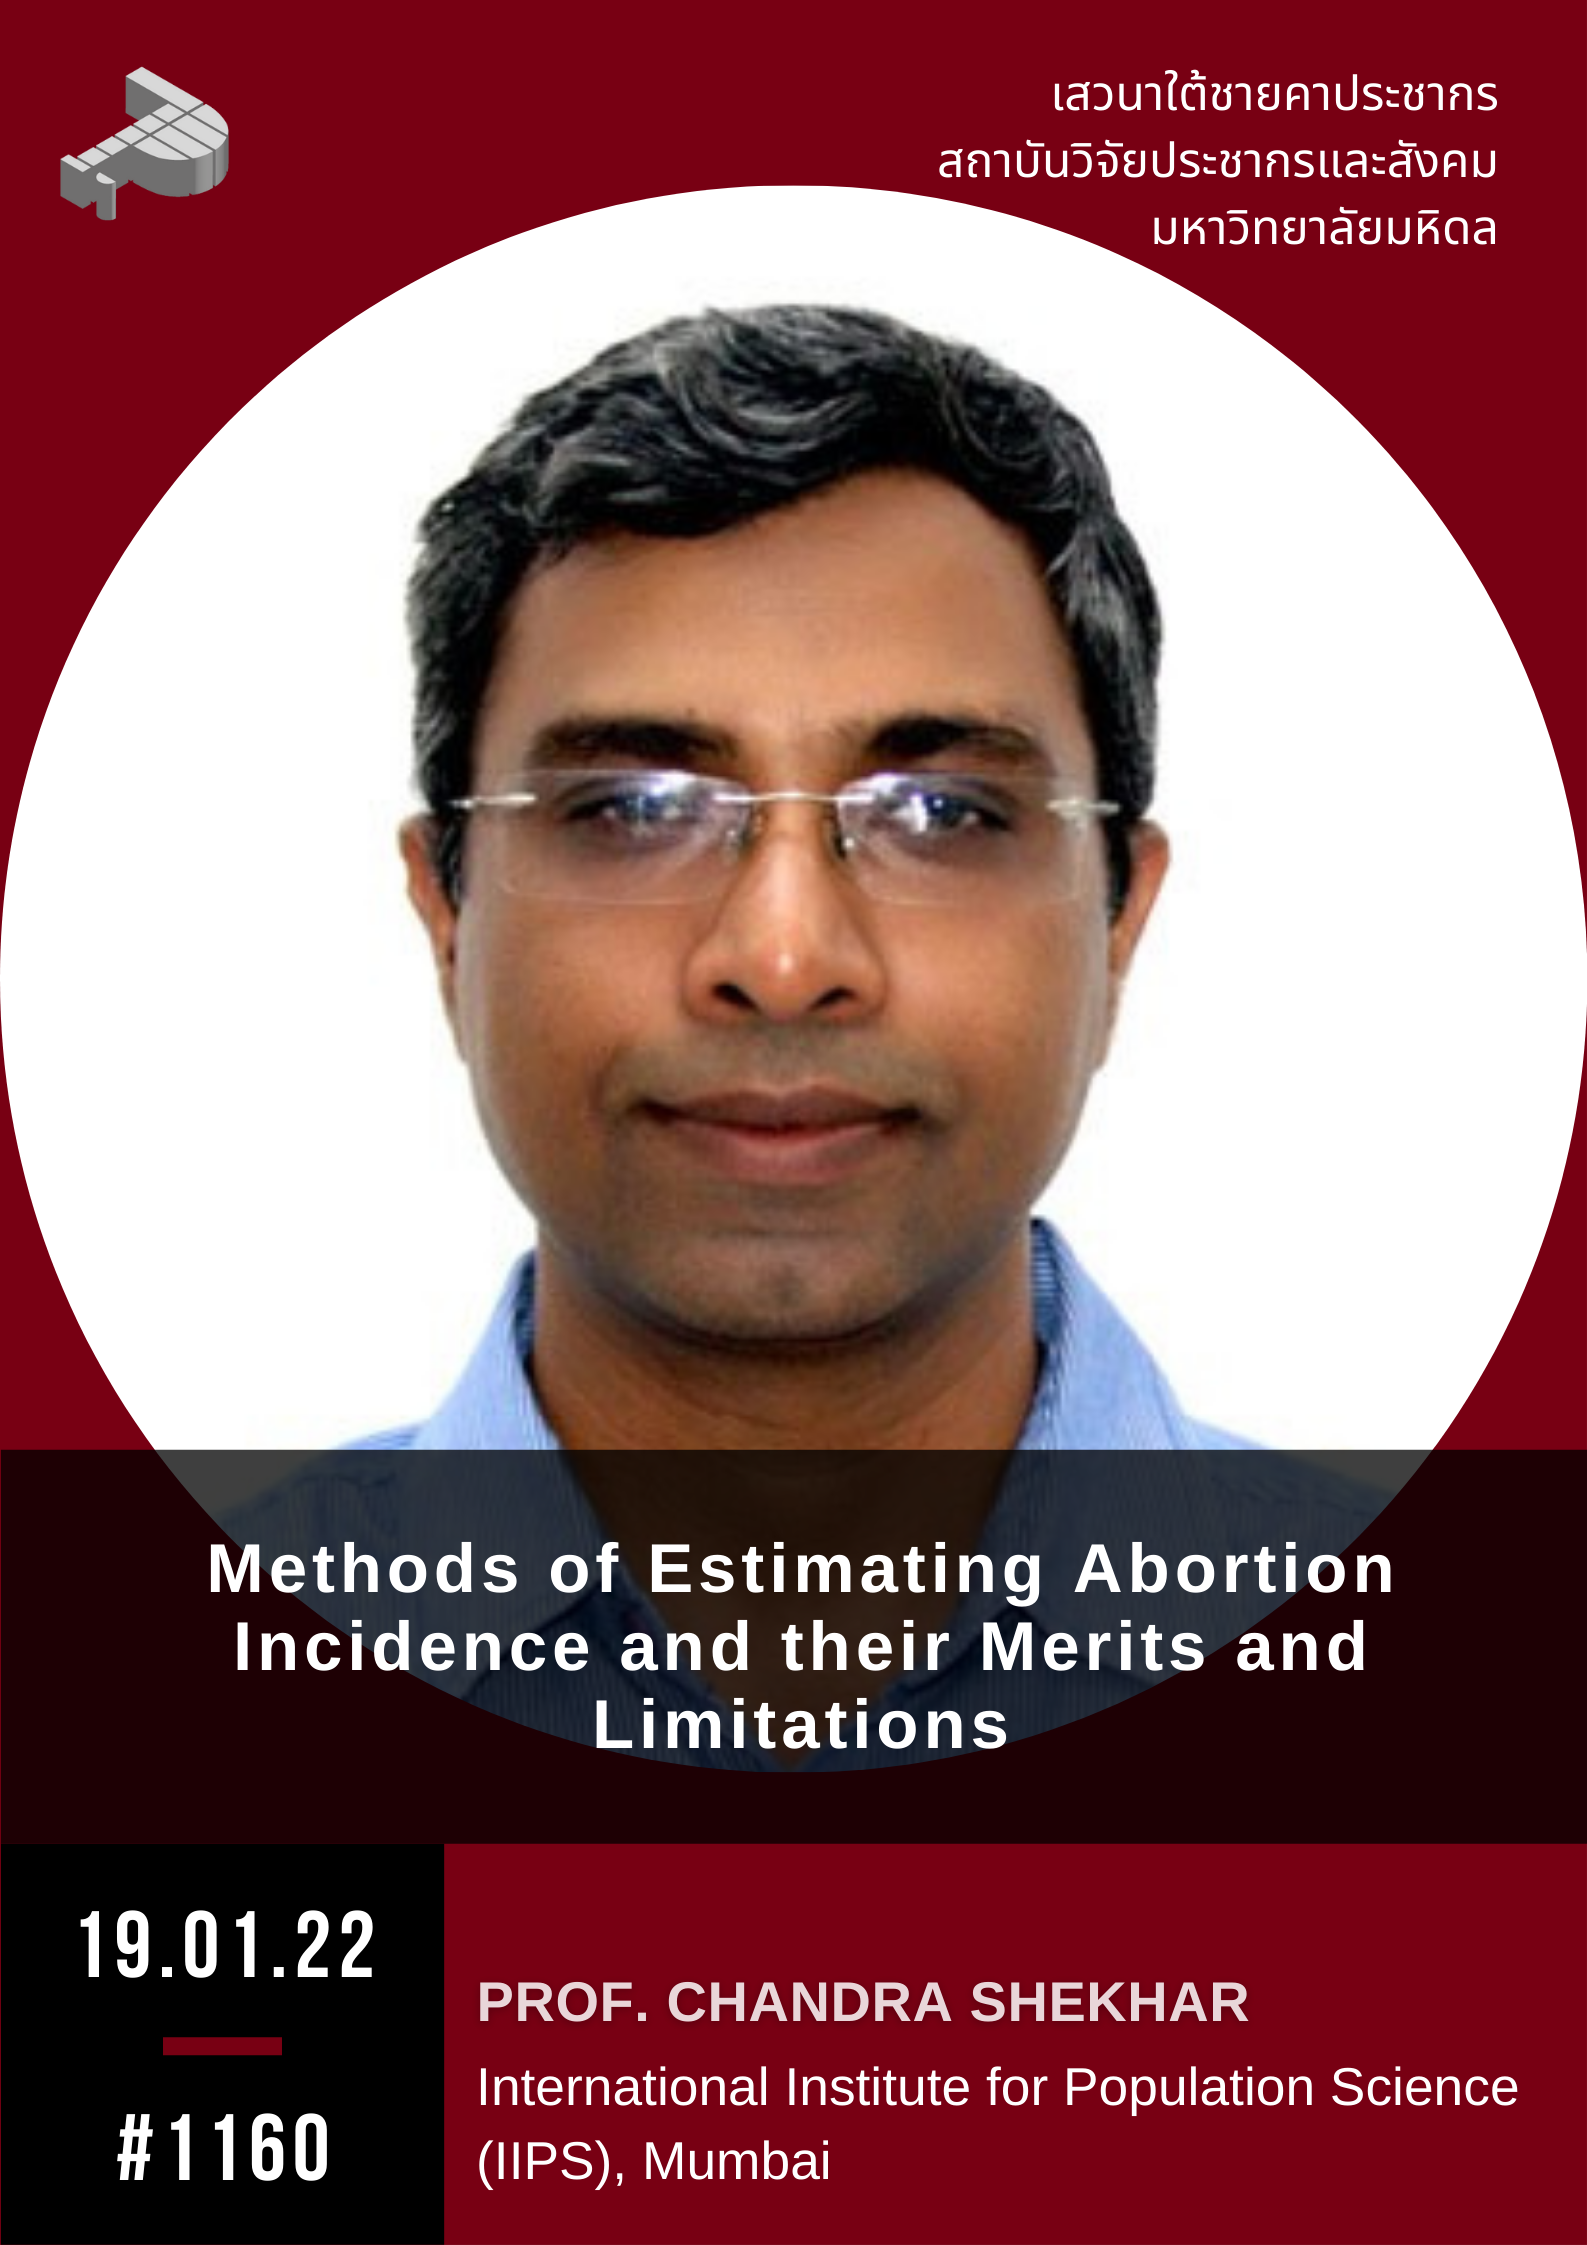 Methods of Estimating Abortion Incidence and their Merits and Limitations